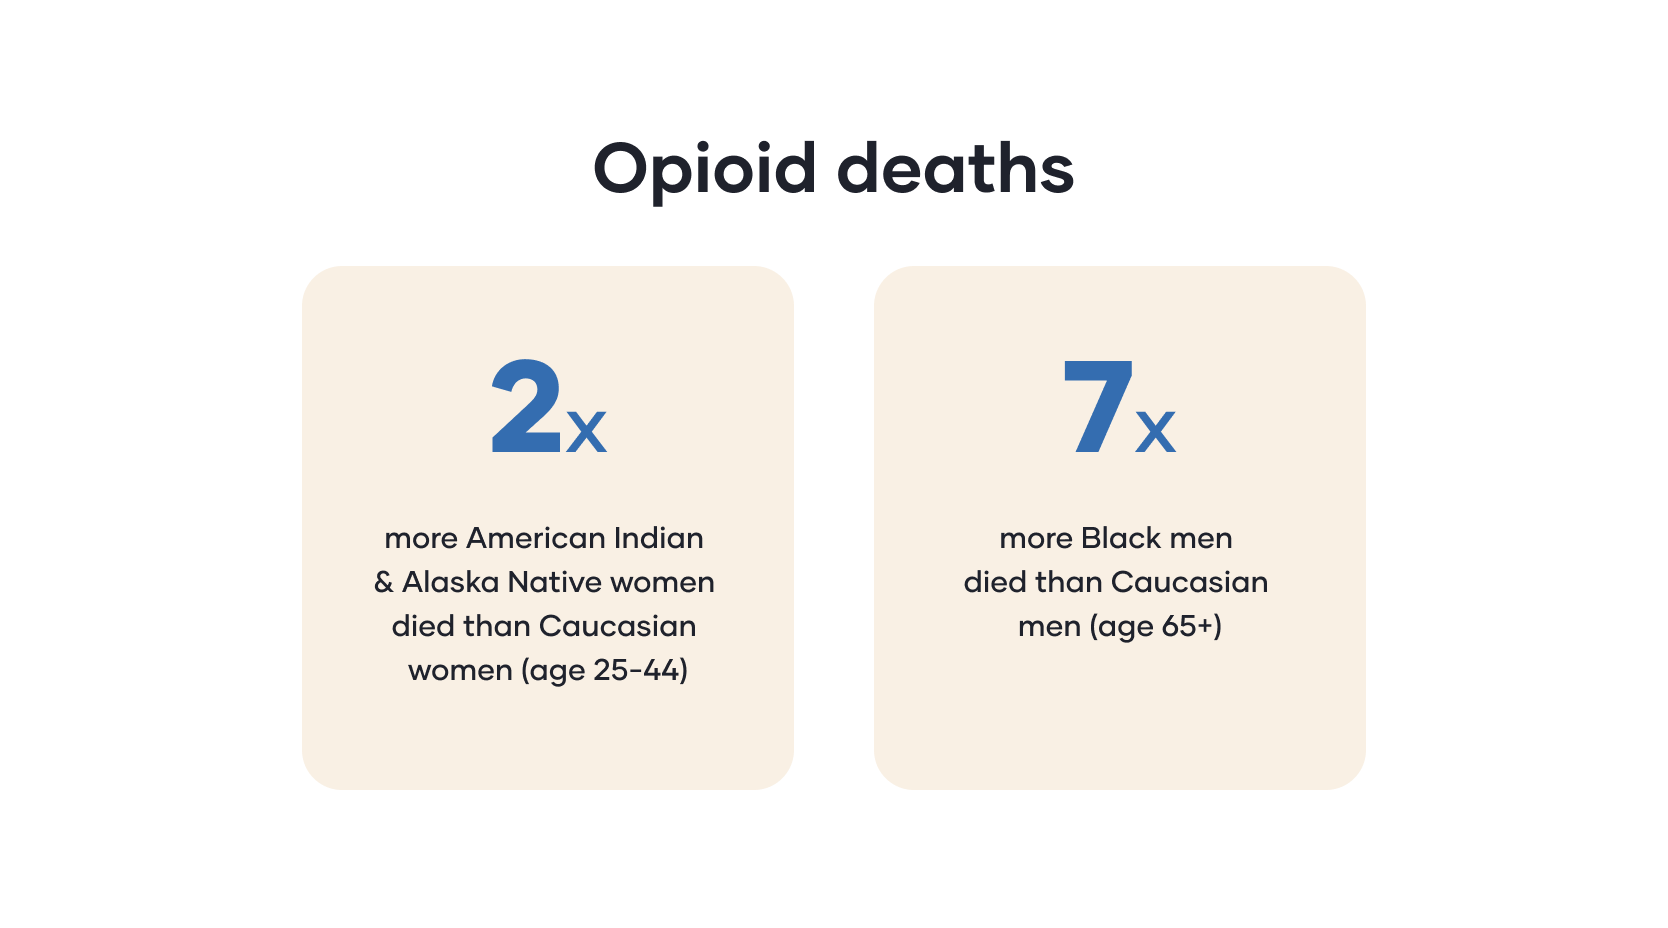 2X more American Indians and Alaska Native women died from opioids than caucasian women, and 7X more black men died than Caucasian men from opioids